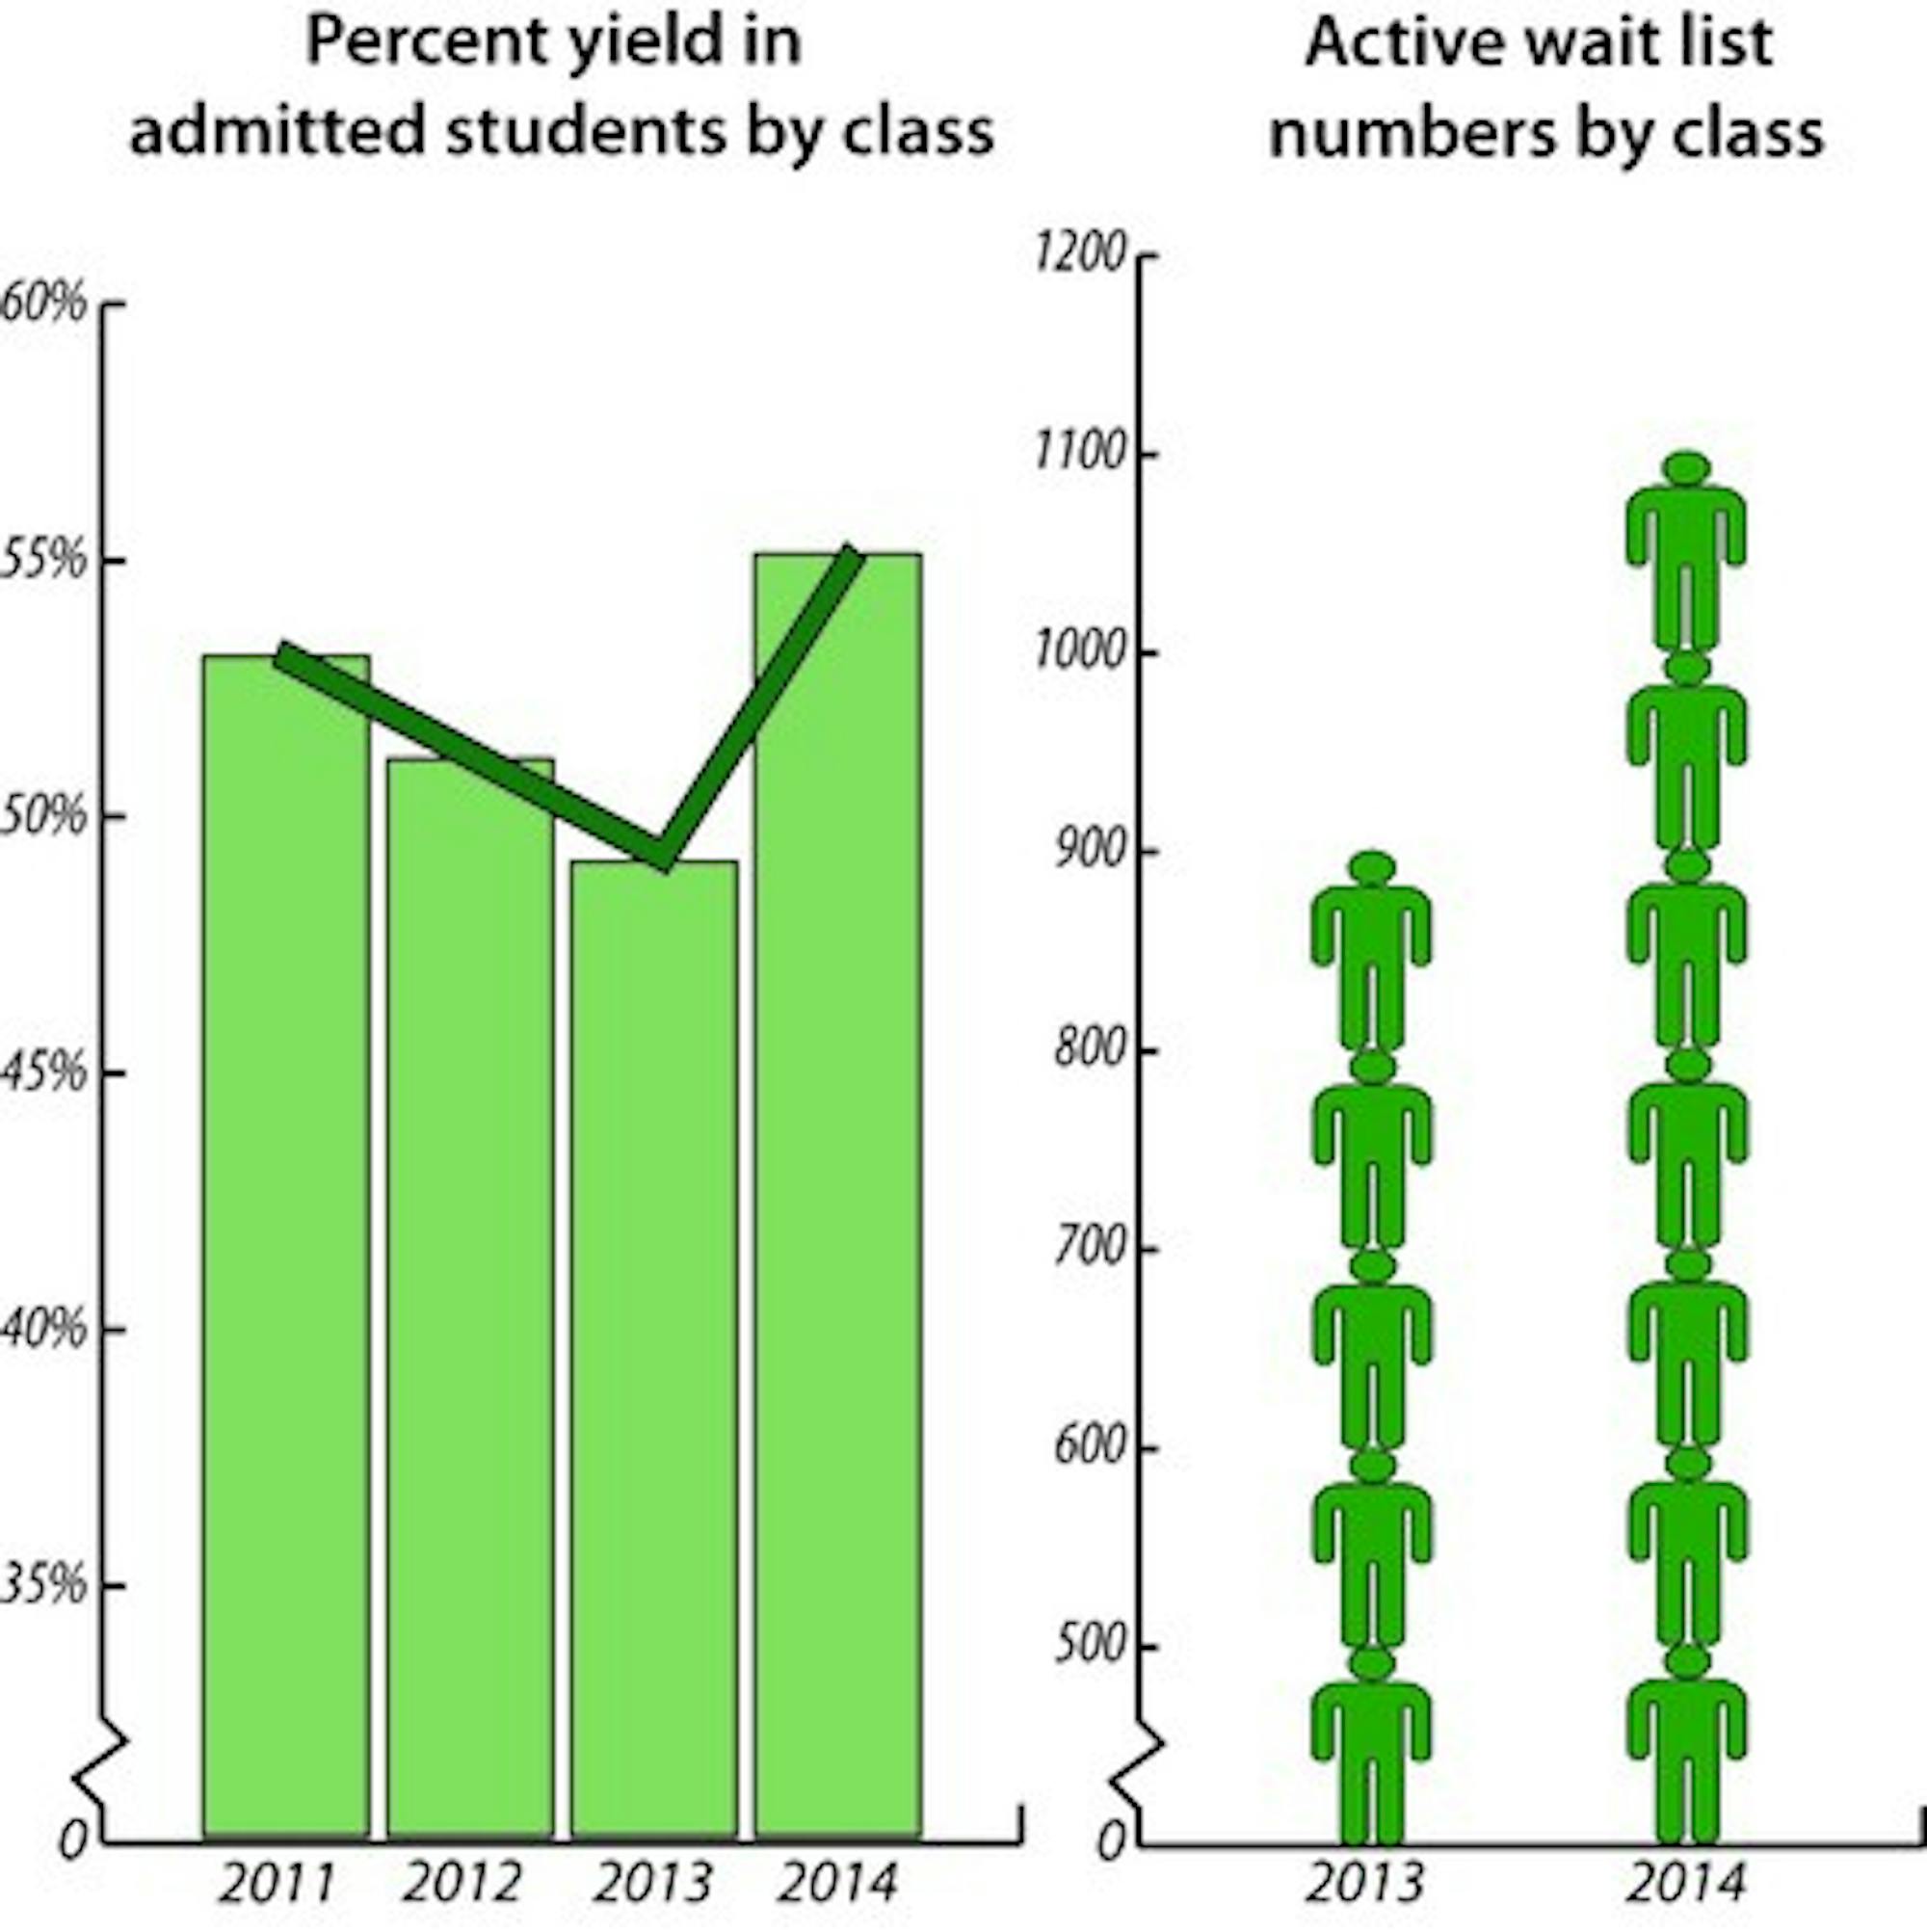 This year, the Admissions office saw an increase in admissions yield, as well as the number of students on the waitlist.